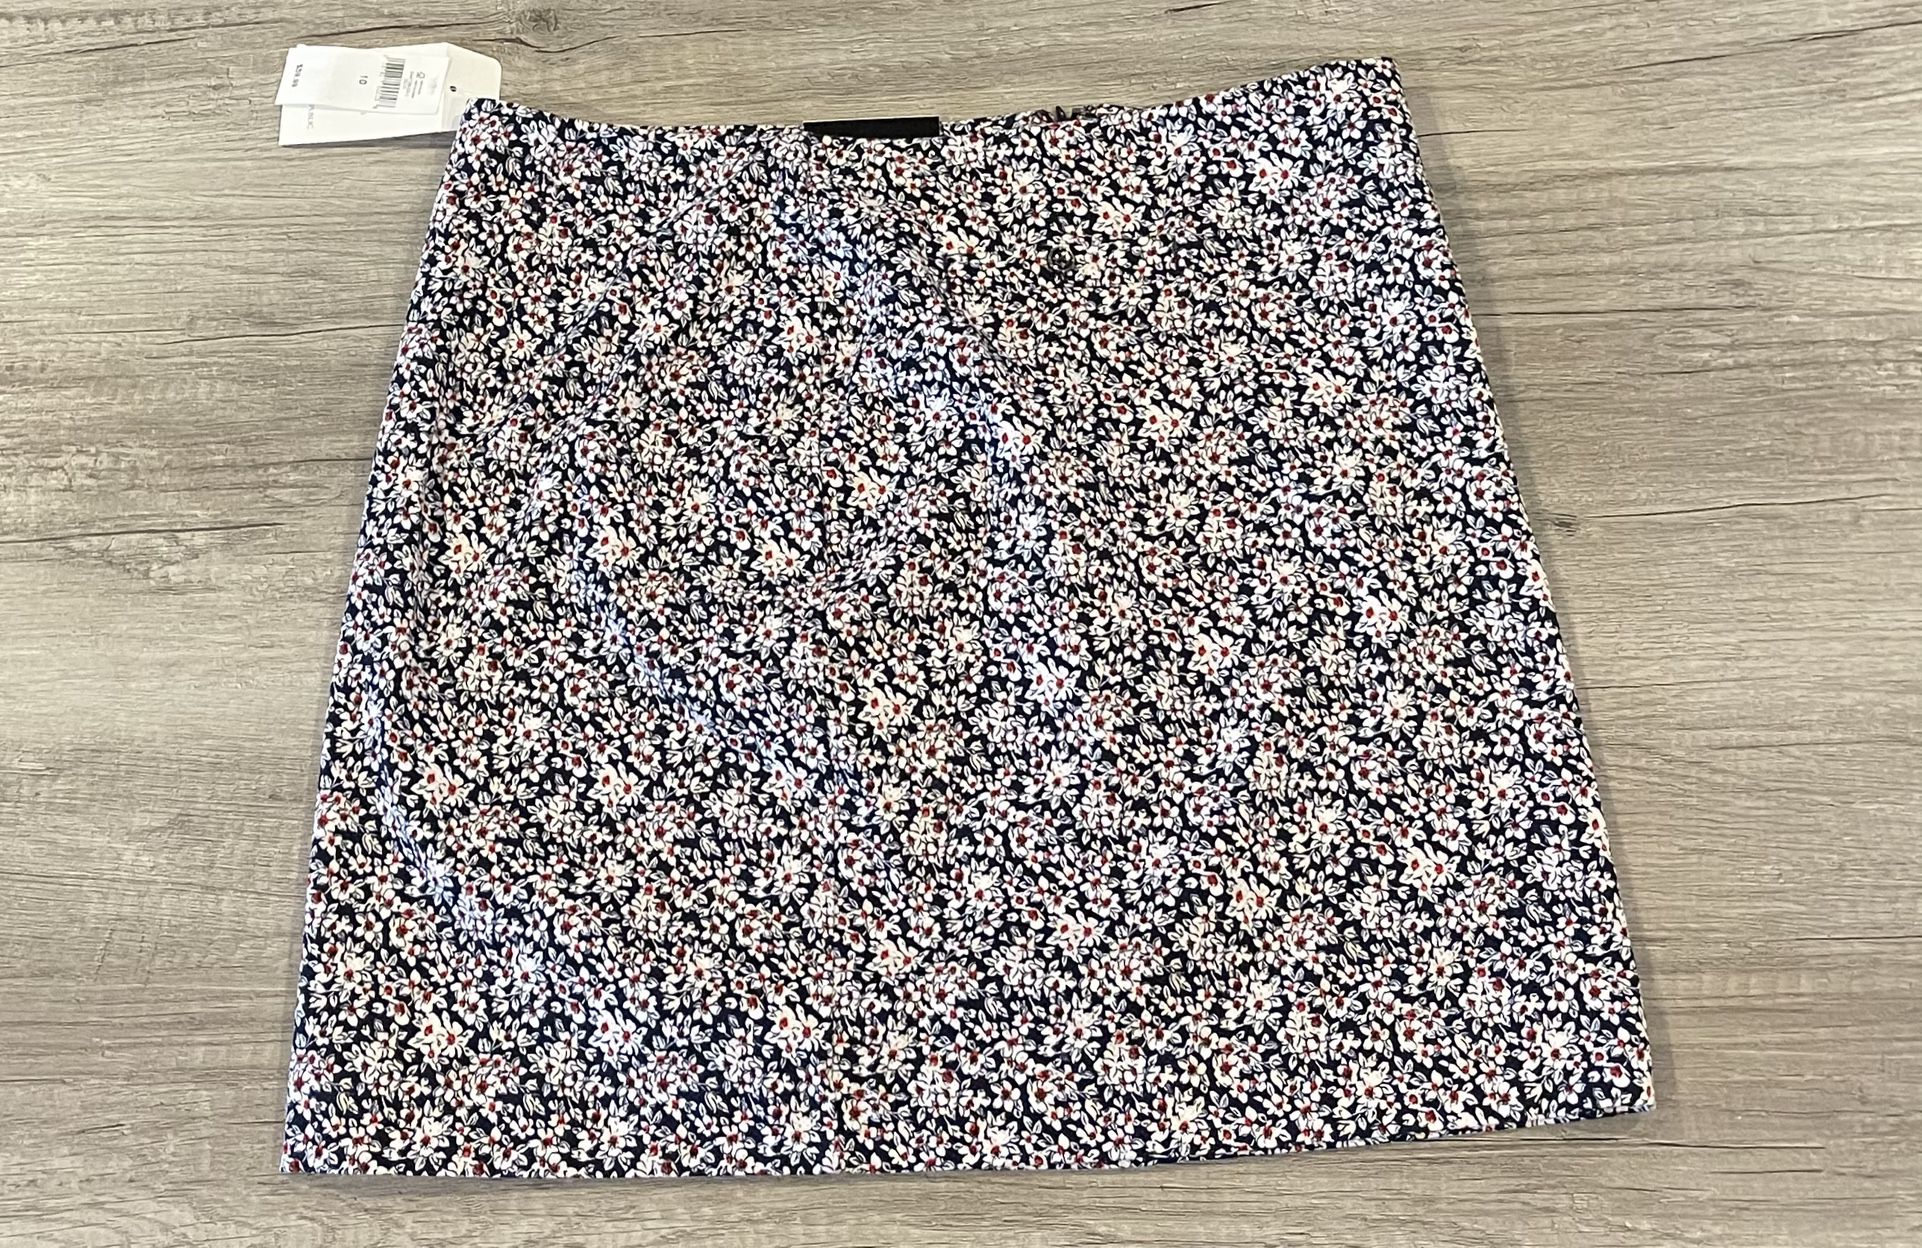 Banana Republic Women's Navy Blue Floral Pencil Skirt Pockets Side Zip Size 10 - Brand new with tags